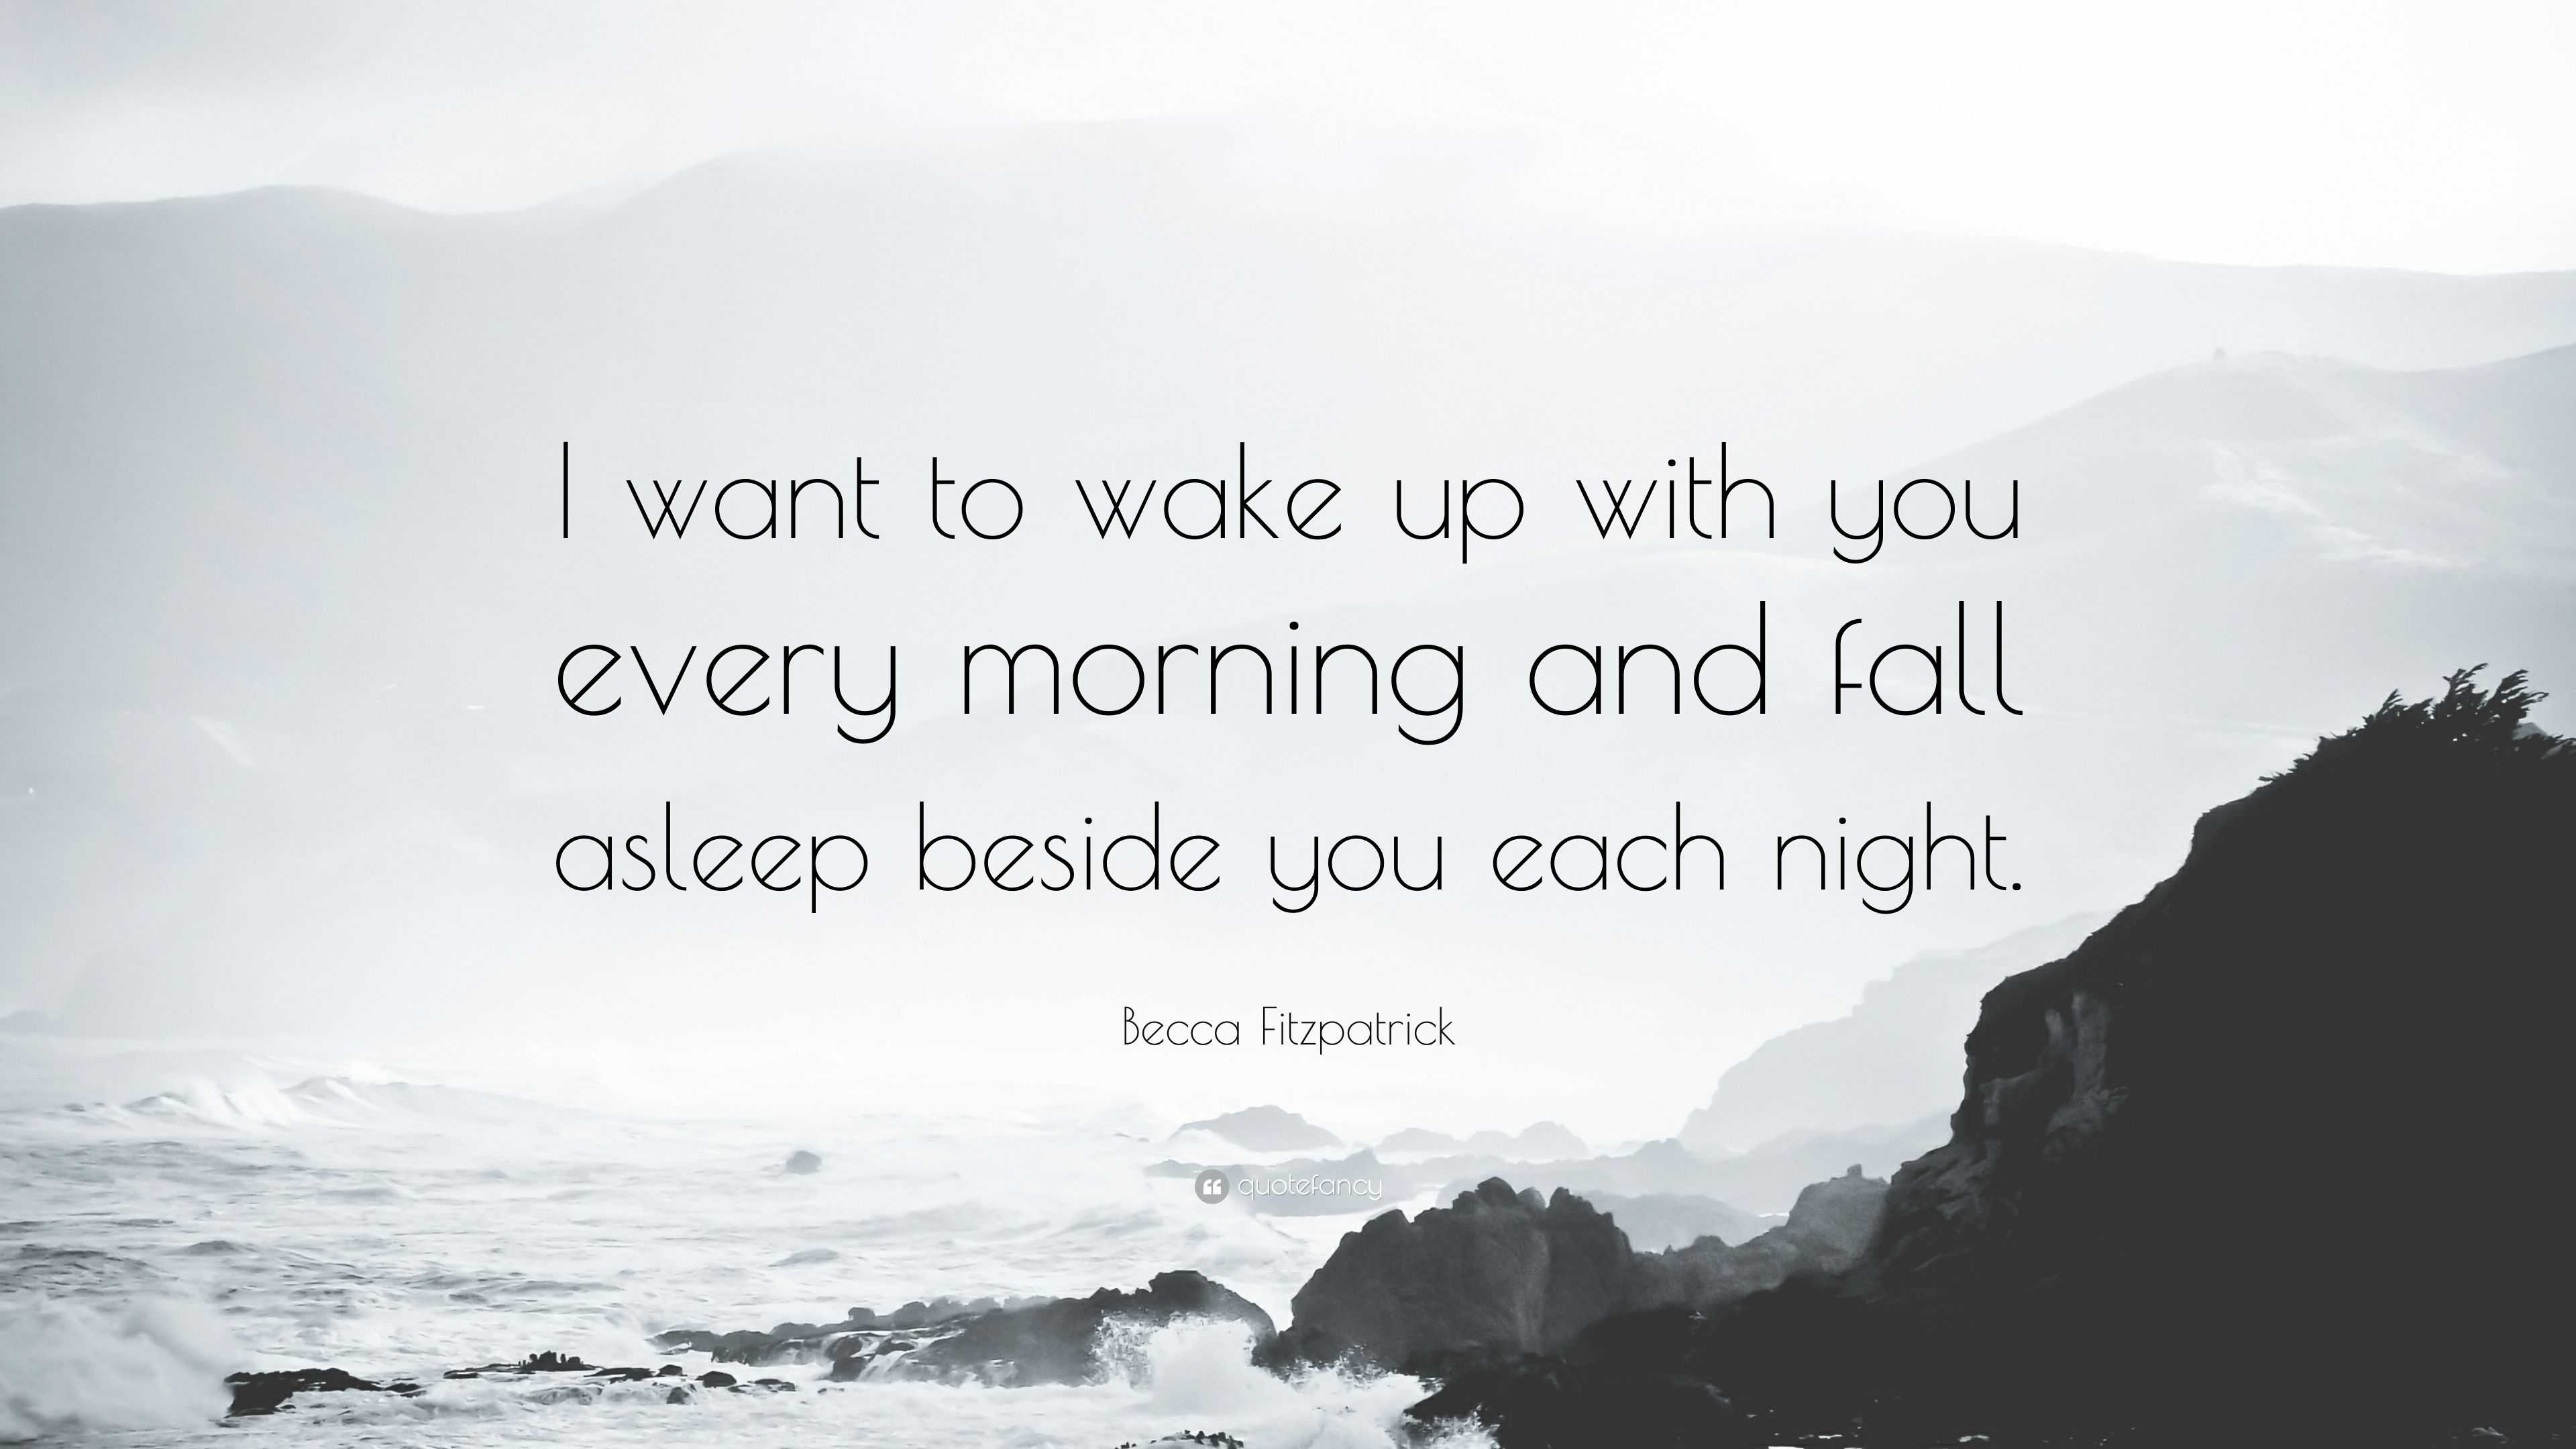 Becca Fitzpatrick Quote I Want To Wake Up With You Every Morning And Fall Asleep Beside